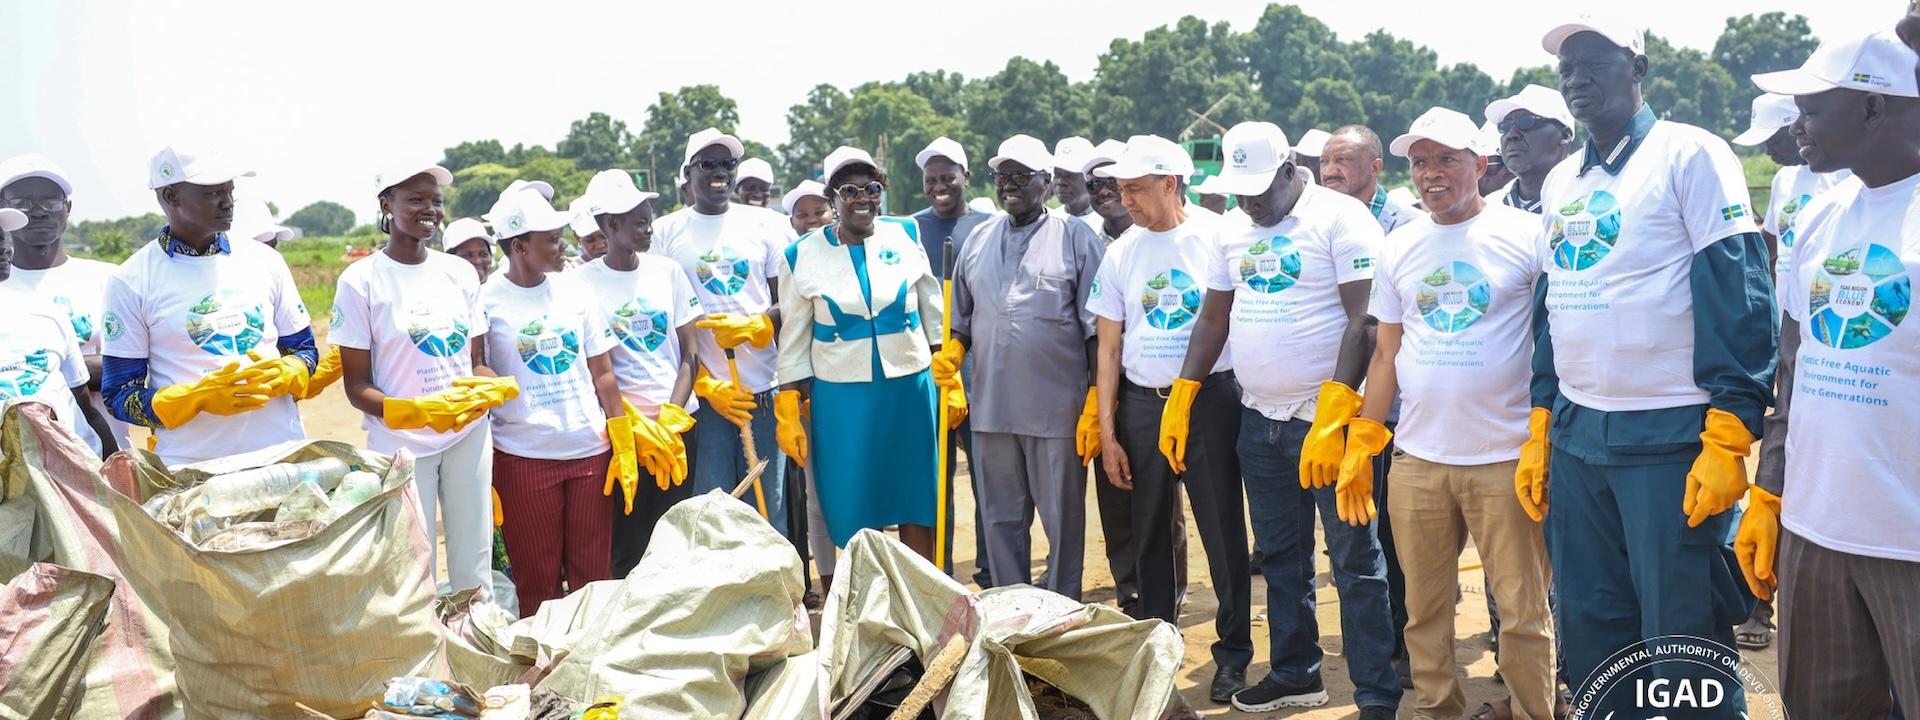 Nile River Banks Cleaning Campaign Against Plastic Pollution in Juba, South Sudan